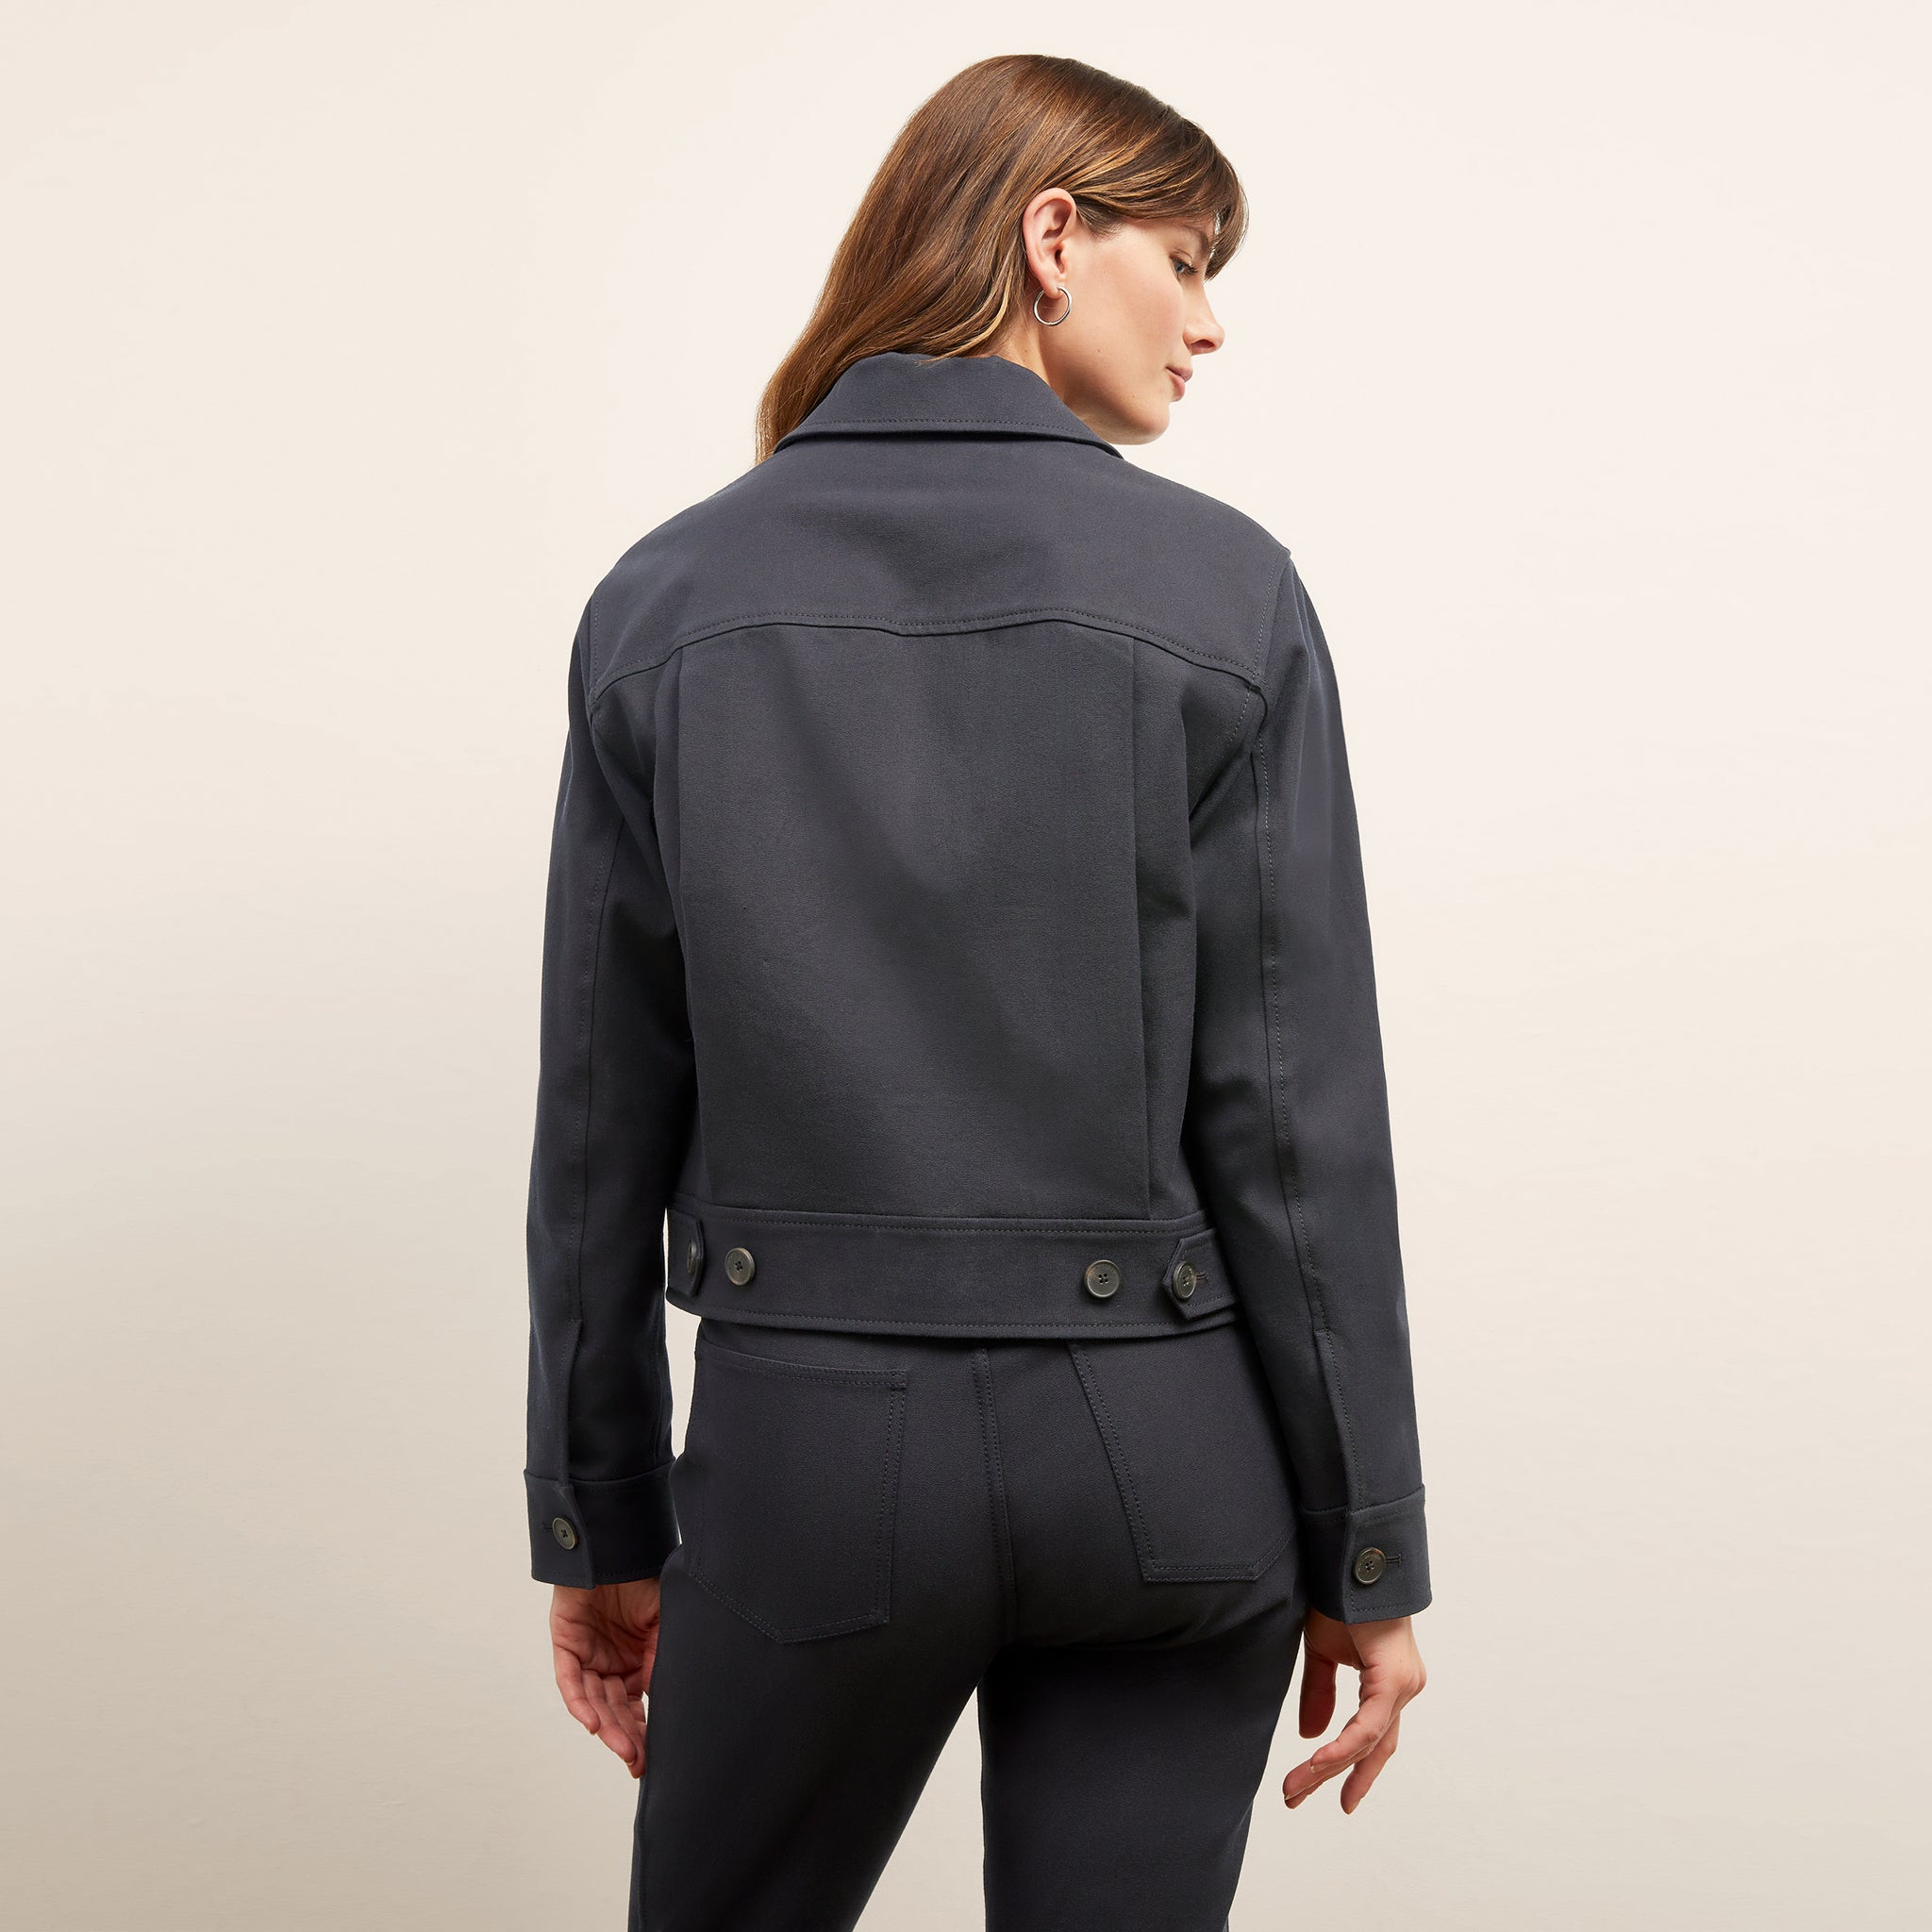 back image of a woman wearing the rhoda jacket in ink